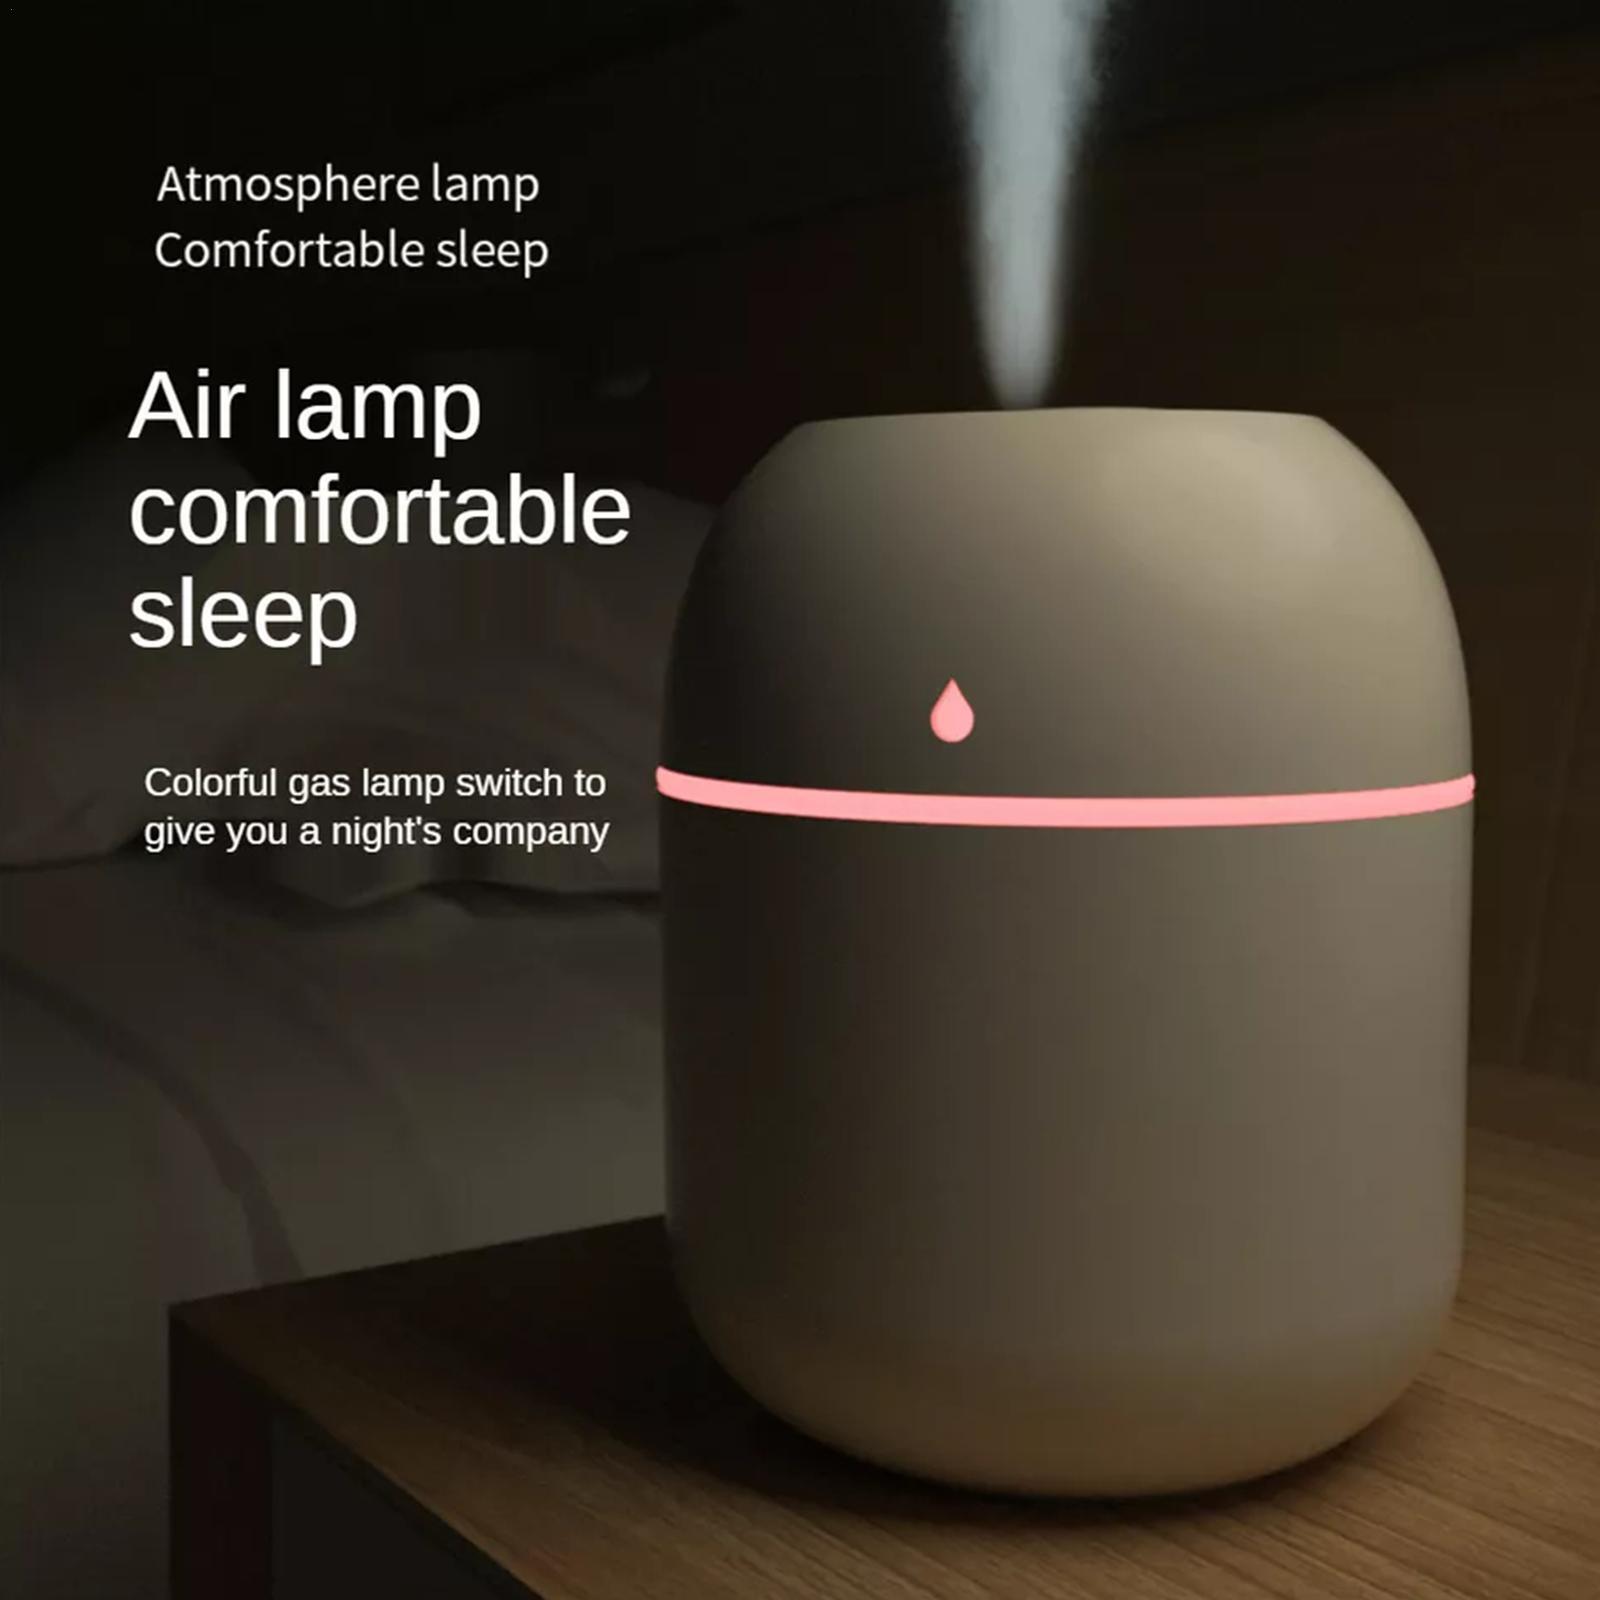 

220ml Usb Portable Home Humidifier & Aroma Diffuser - Cool Mist Air Freshener For Back To School Supplies